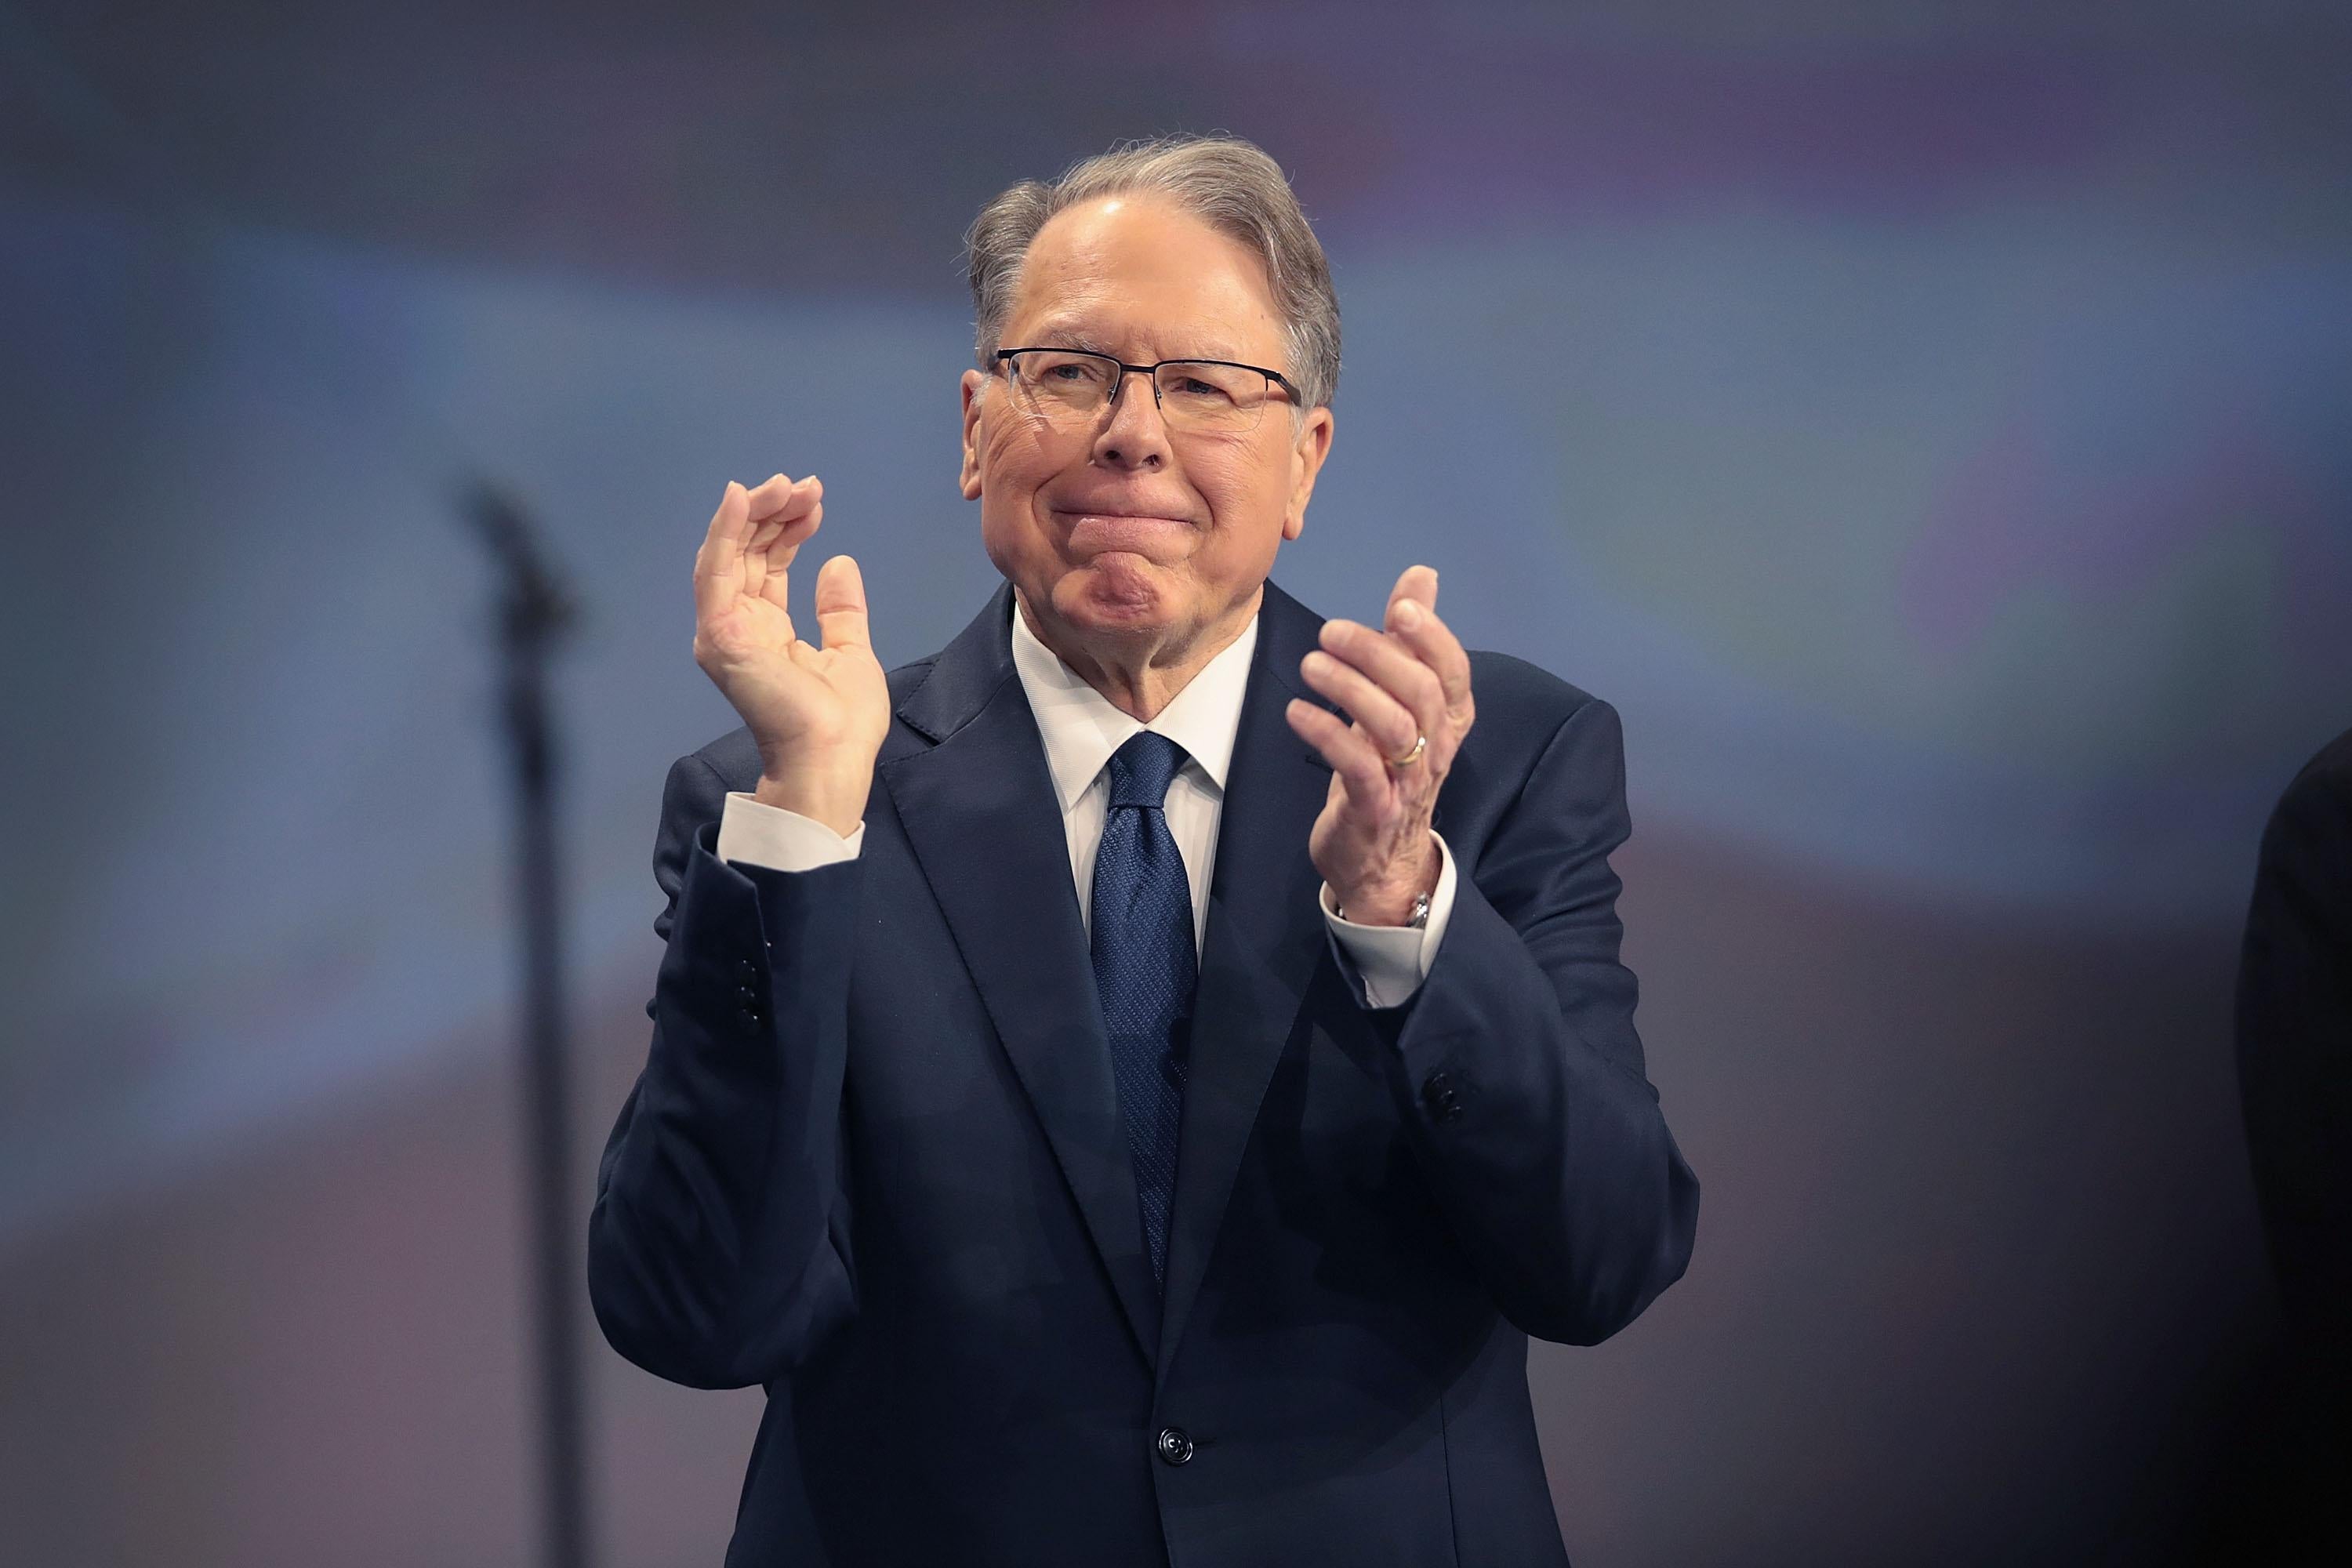 NRA CEO Wayne LaPierre claps at an NRA event.